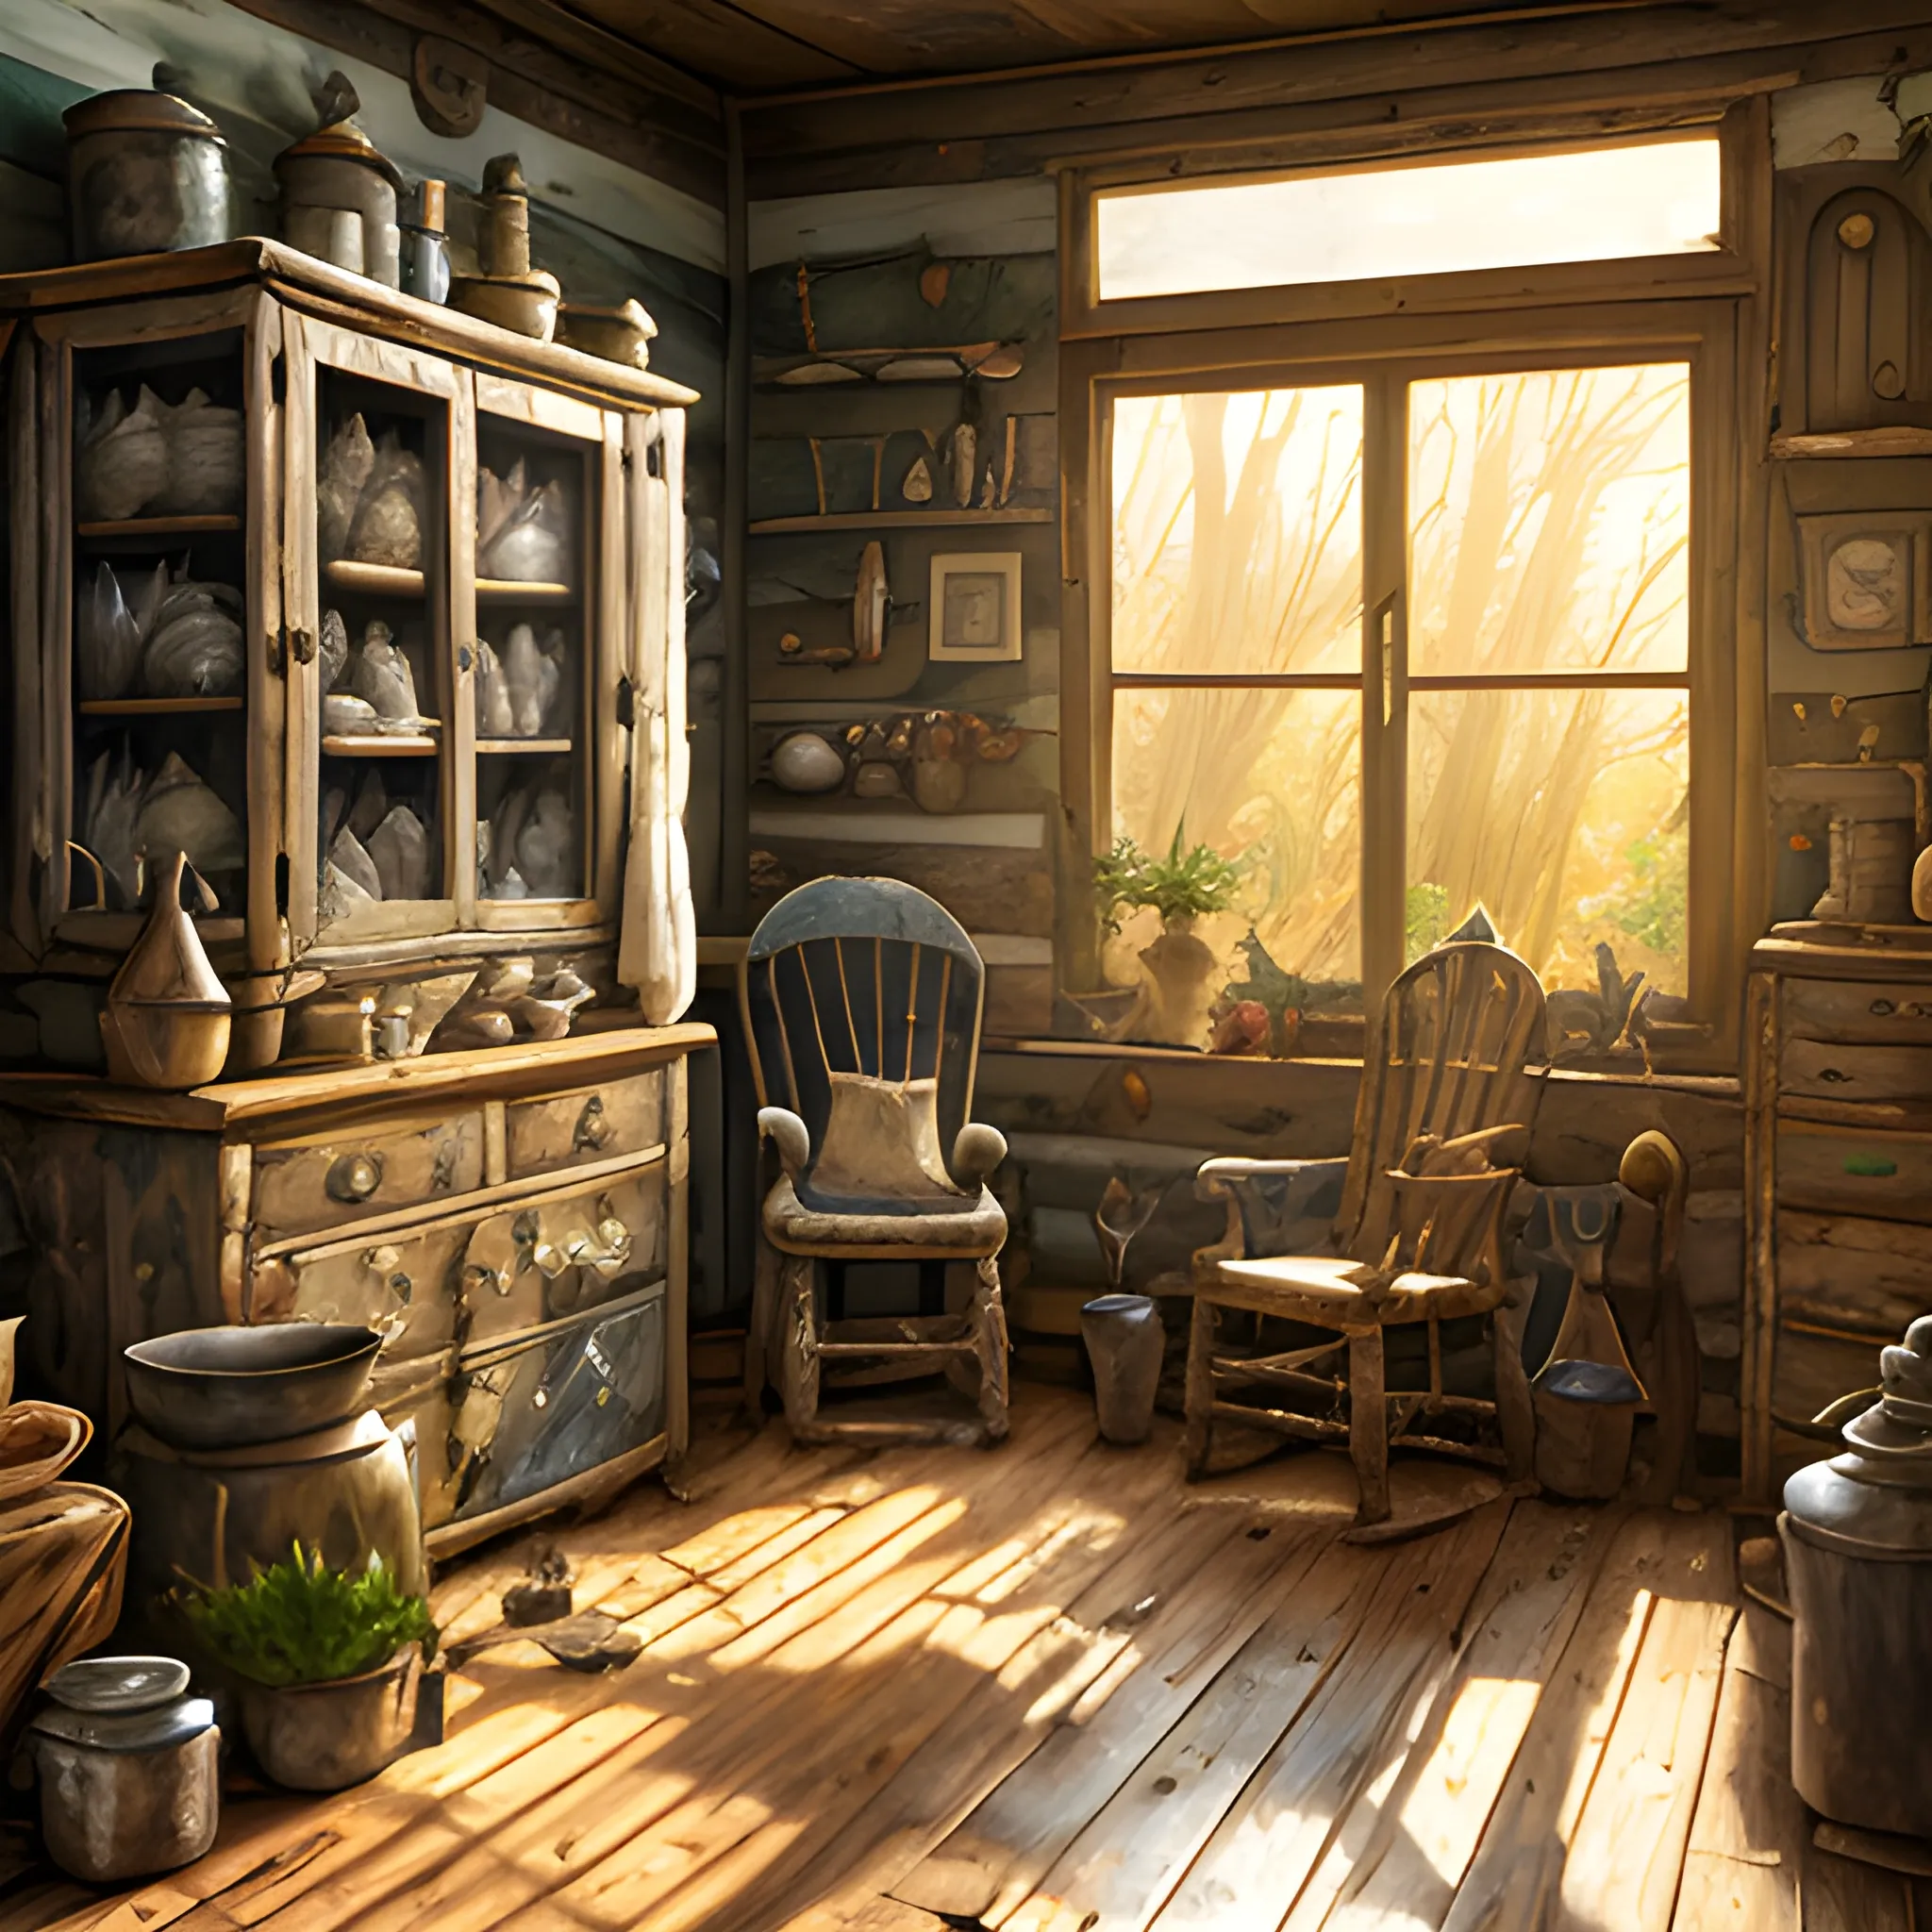 expressive rustic oil painting, interior view of a cluttered herbalist cottage, waxy candles, cabinets, wood furnishings, herbs hanging, wood chair, light bloom, dust, ambient occlusion, morning, rays of light coming through windows, dim lighting, brush strokes oil painting, 3D